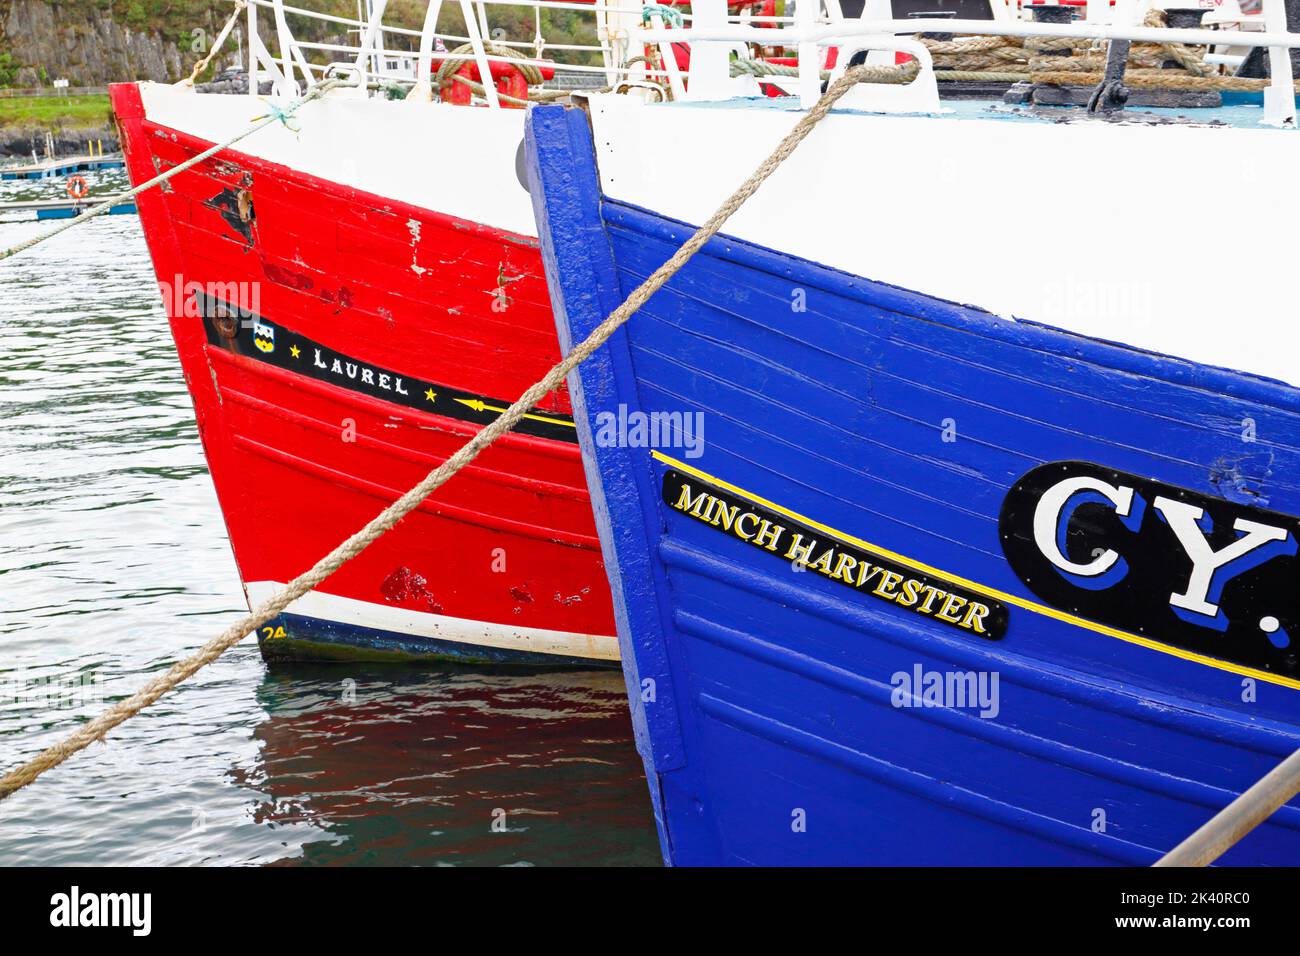 The bows of two fishing boats in the harbour in West Scotland at Mallaig, Morar, Scotland, United Kingdom. Stock Photo